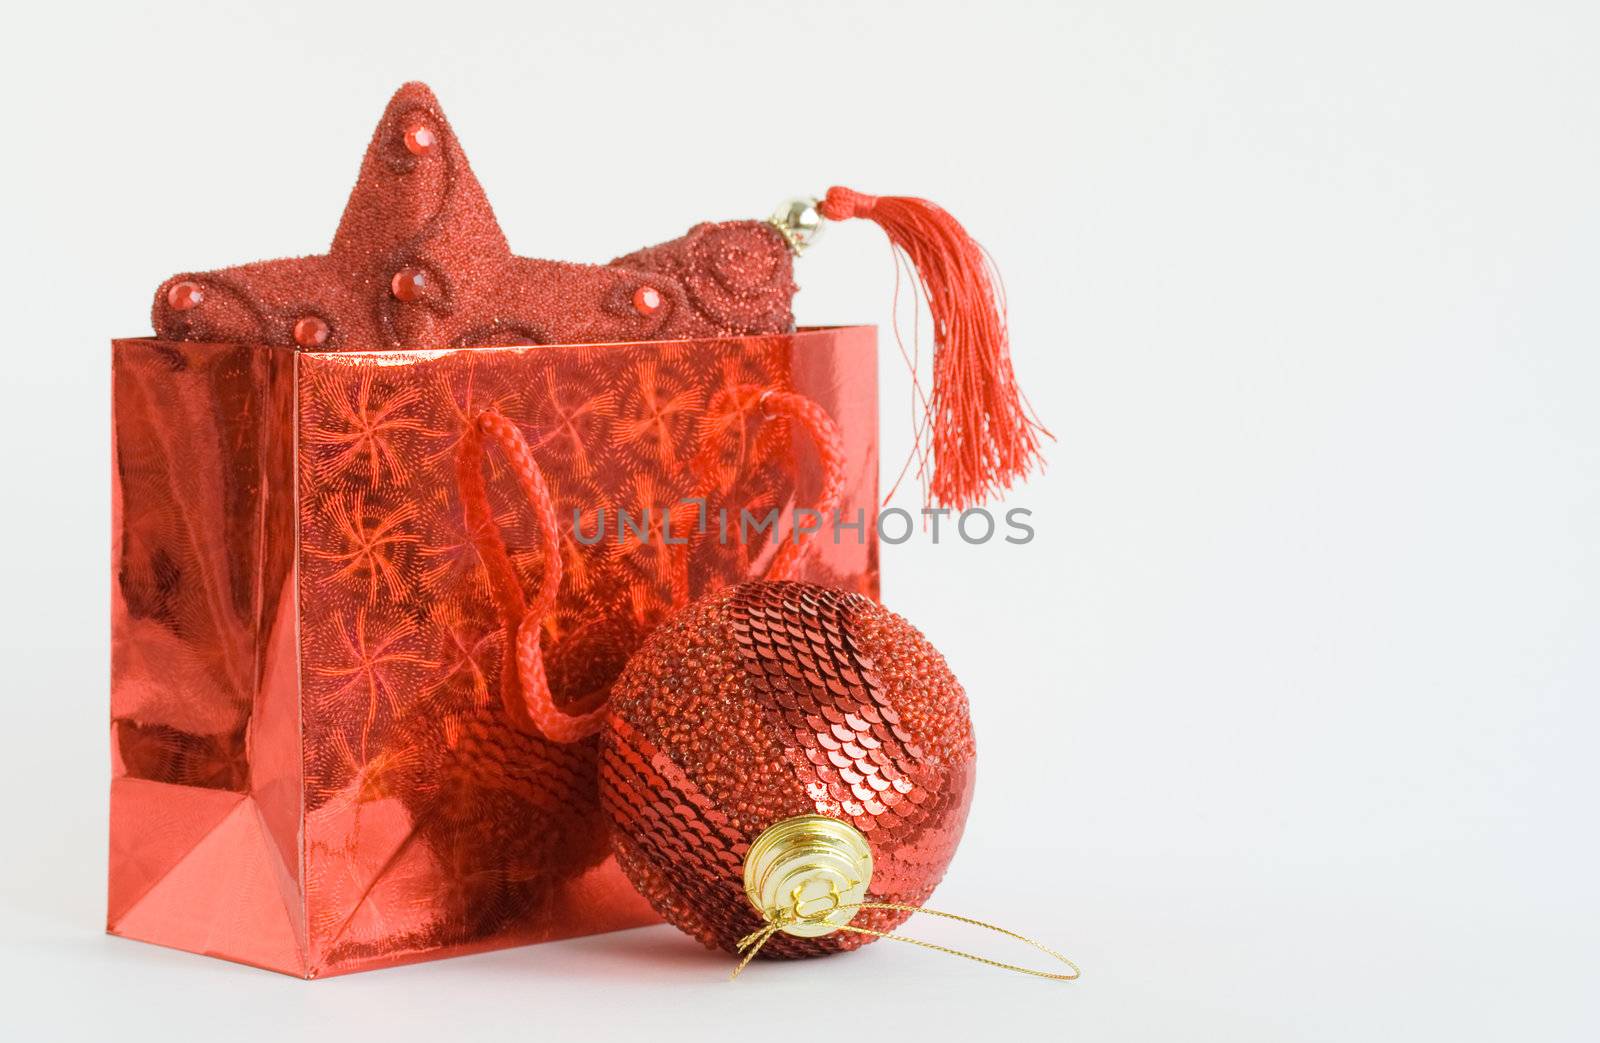 Red bag with handicraft christmas toys on white background. Focus on ball